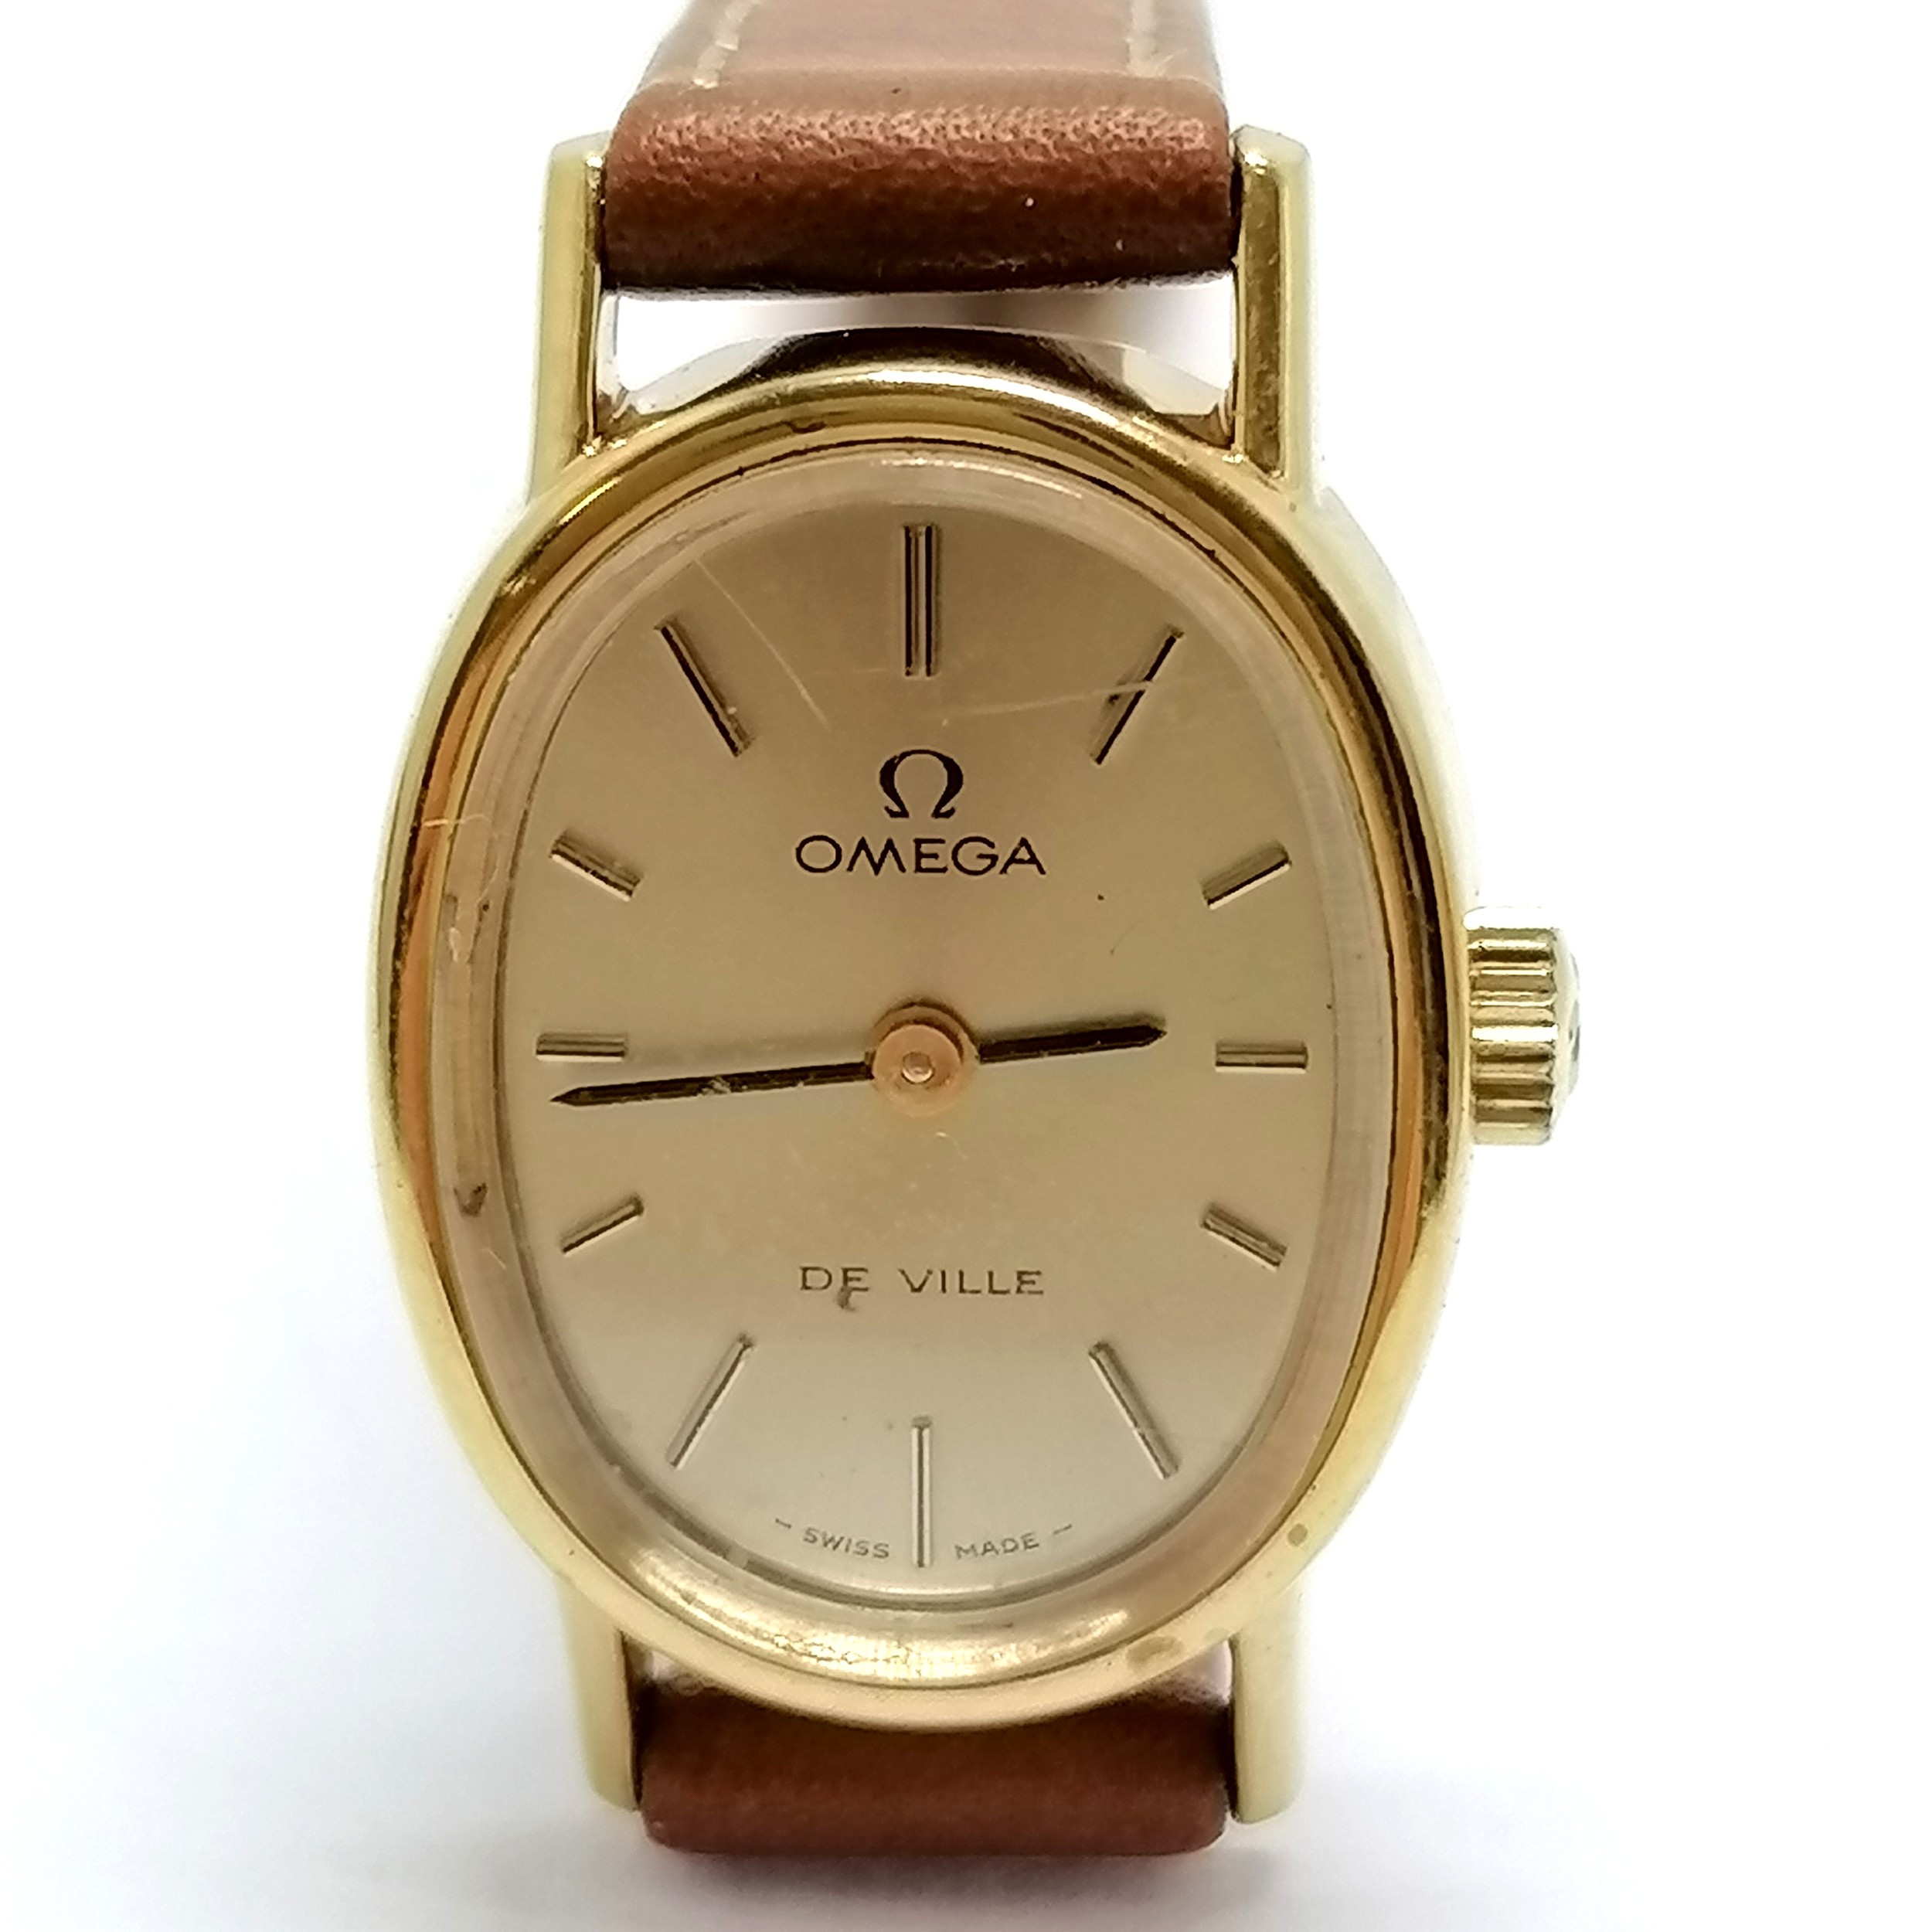 Omega ladies gold plated Deville manual wind wristwatch - no obvious damage & running BUT WE